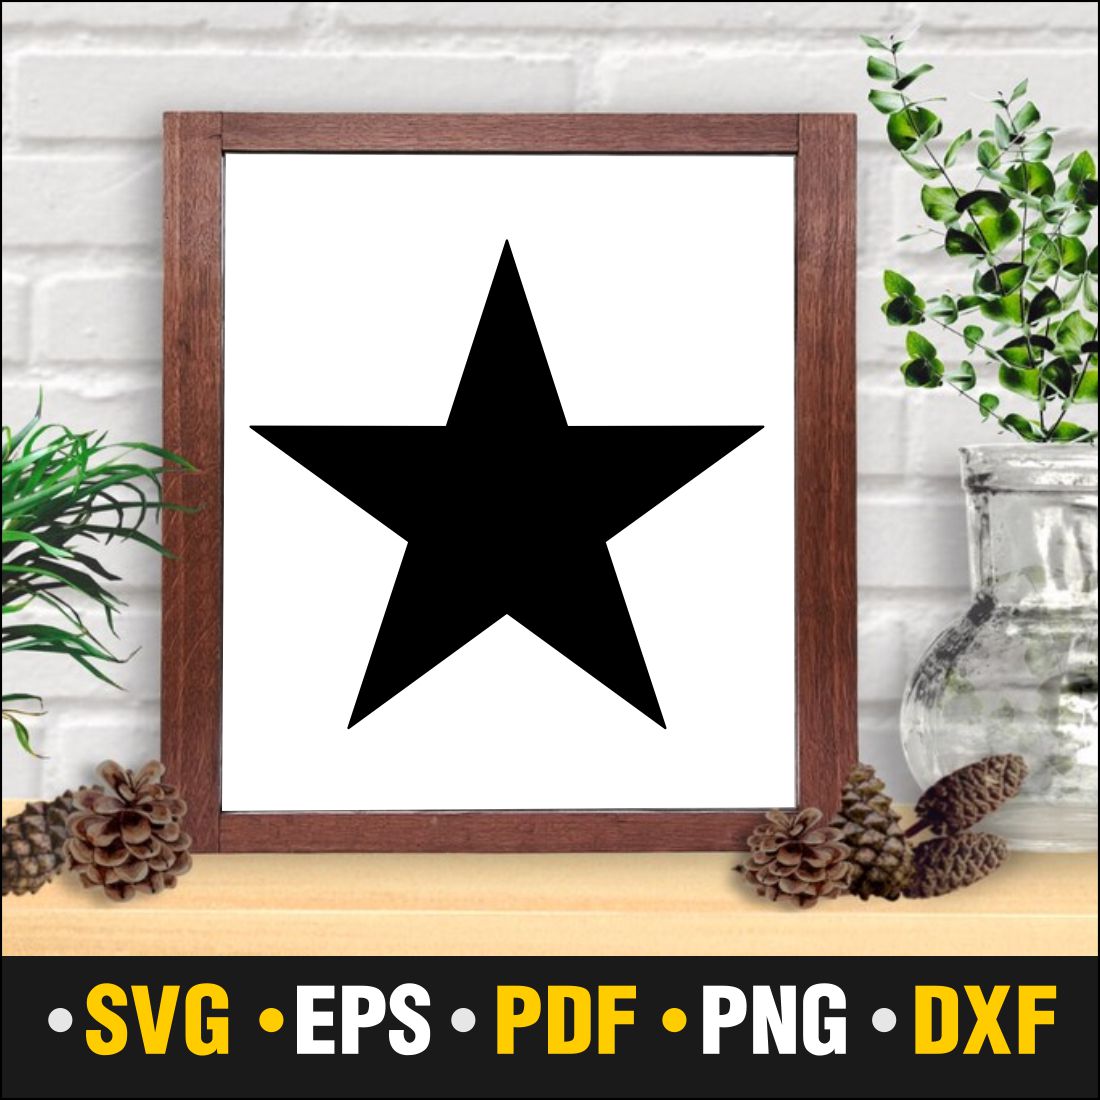 Star Svg, Stars, Stars Svg, Star Outline Png, Star Monogram Png, Star Svg, Star Svg, Instant Download Vector Cut file Cricut, Silhouette, Pdf Png, Dxf, Decal preview image.